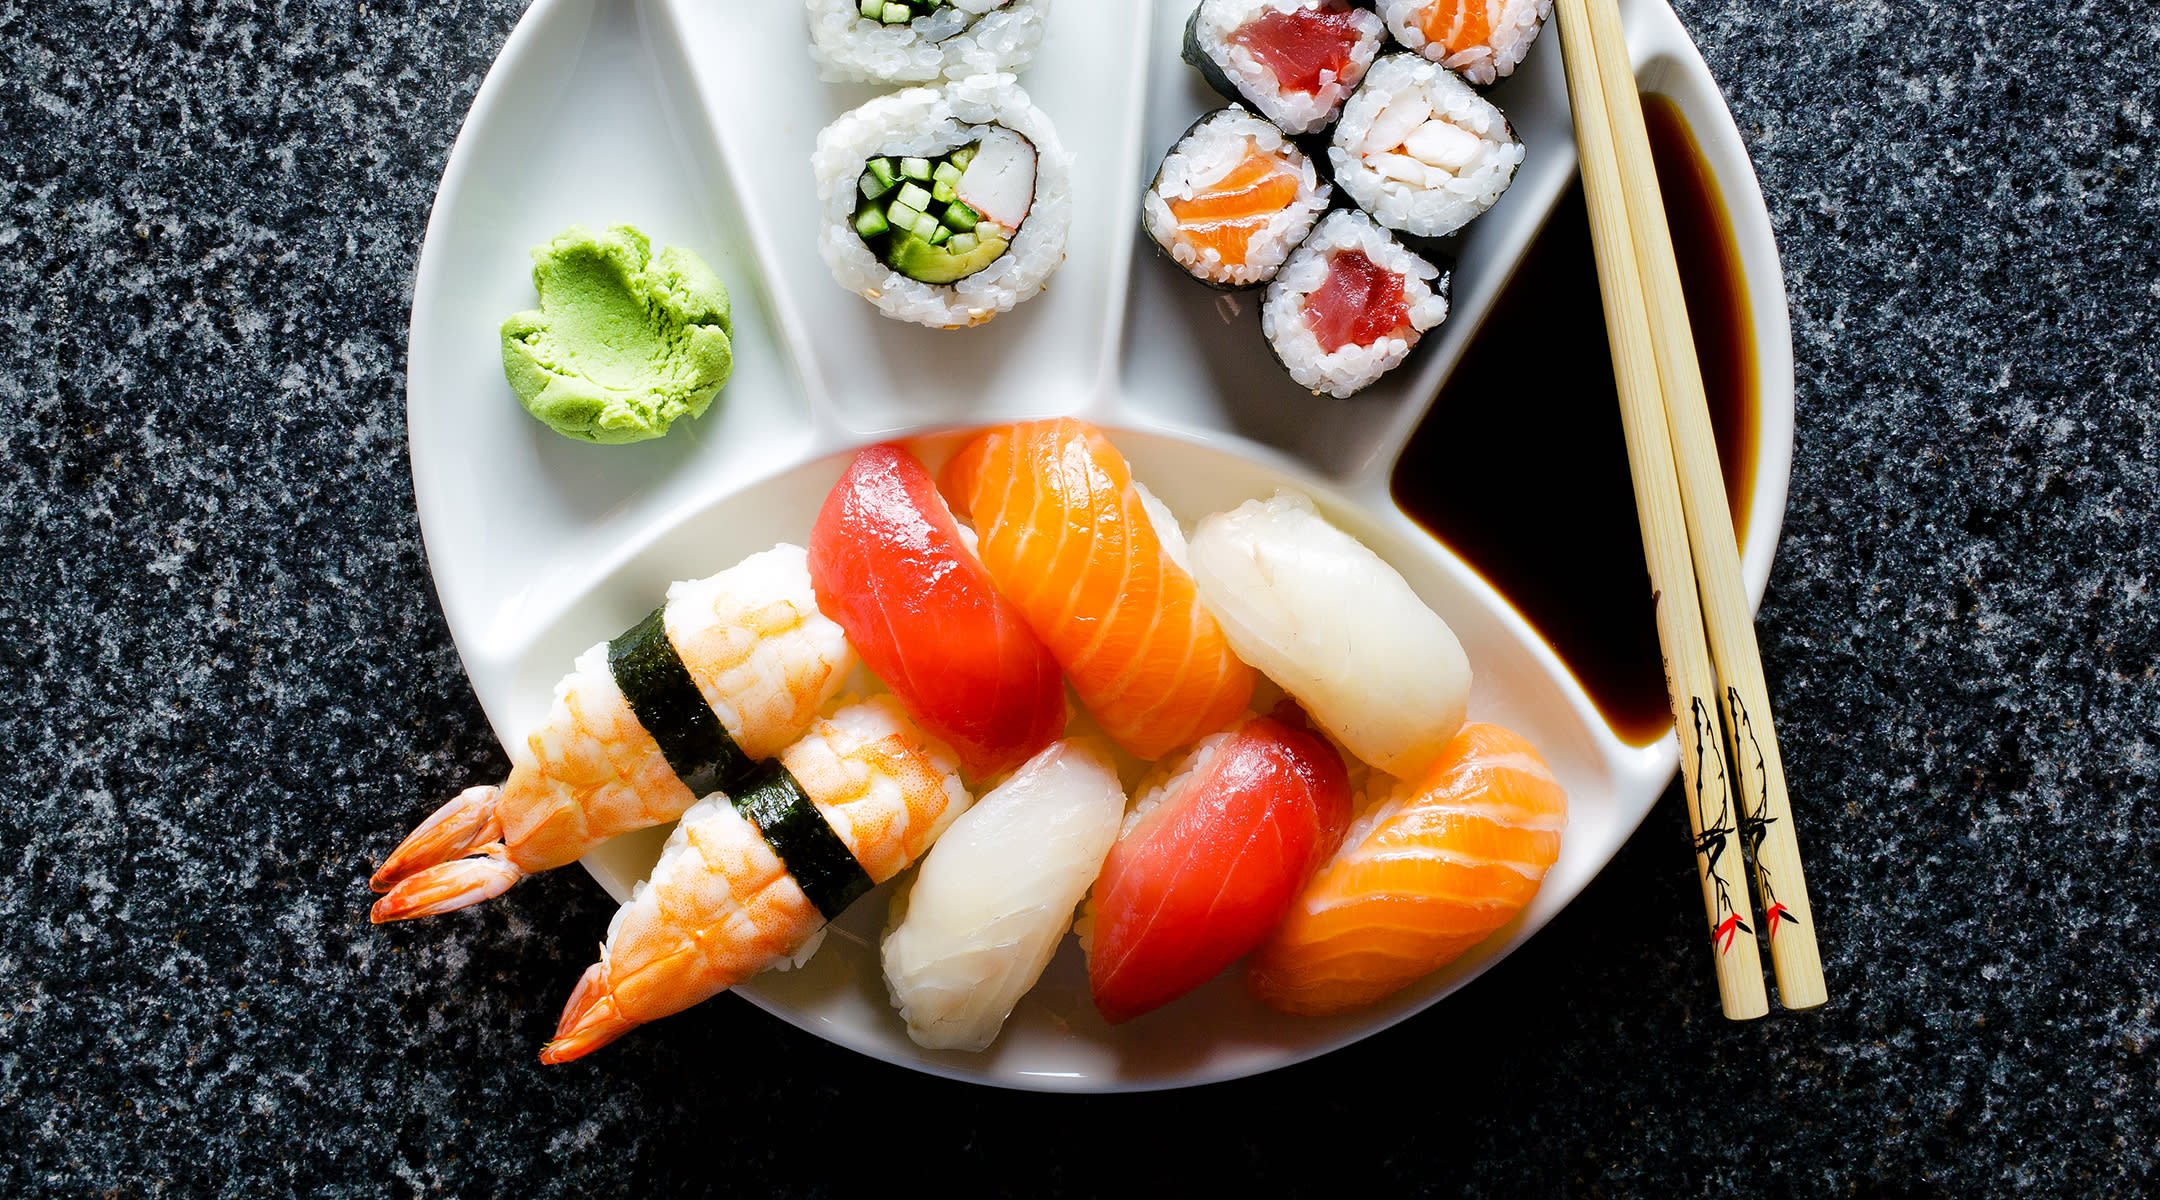 Is Eating Sushi While Pregnant Safe?